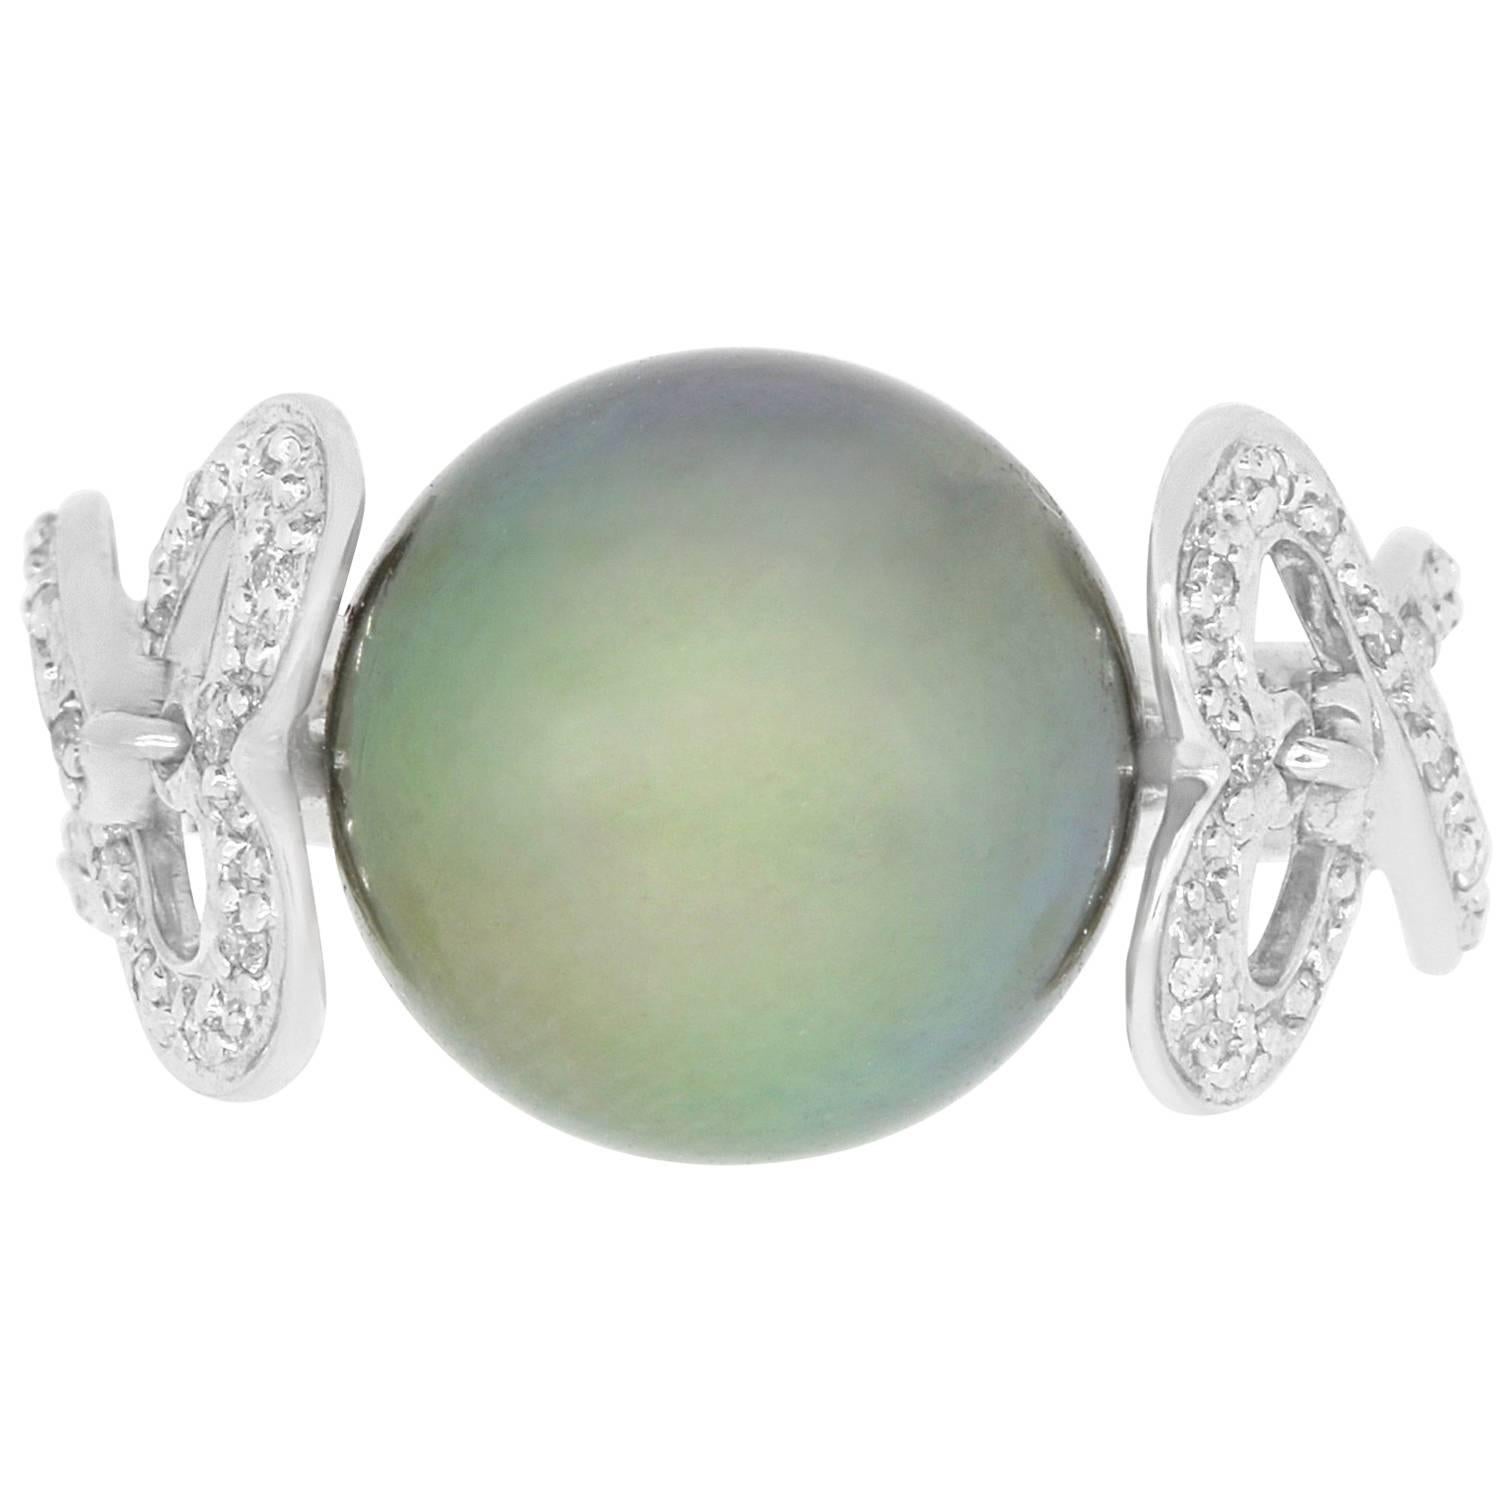 Material: 18k White Gold 
Center Stone Details: 2.31 Carat Tahitian South Sea Pearl 
Mounting Diamond Details: Brilliant Round White Diamonds Approximately 0.13 Carats - Clarity: VS-SI / Color: H-I
Ring Size: Size 6.5. Alberto offers complimentary